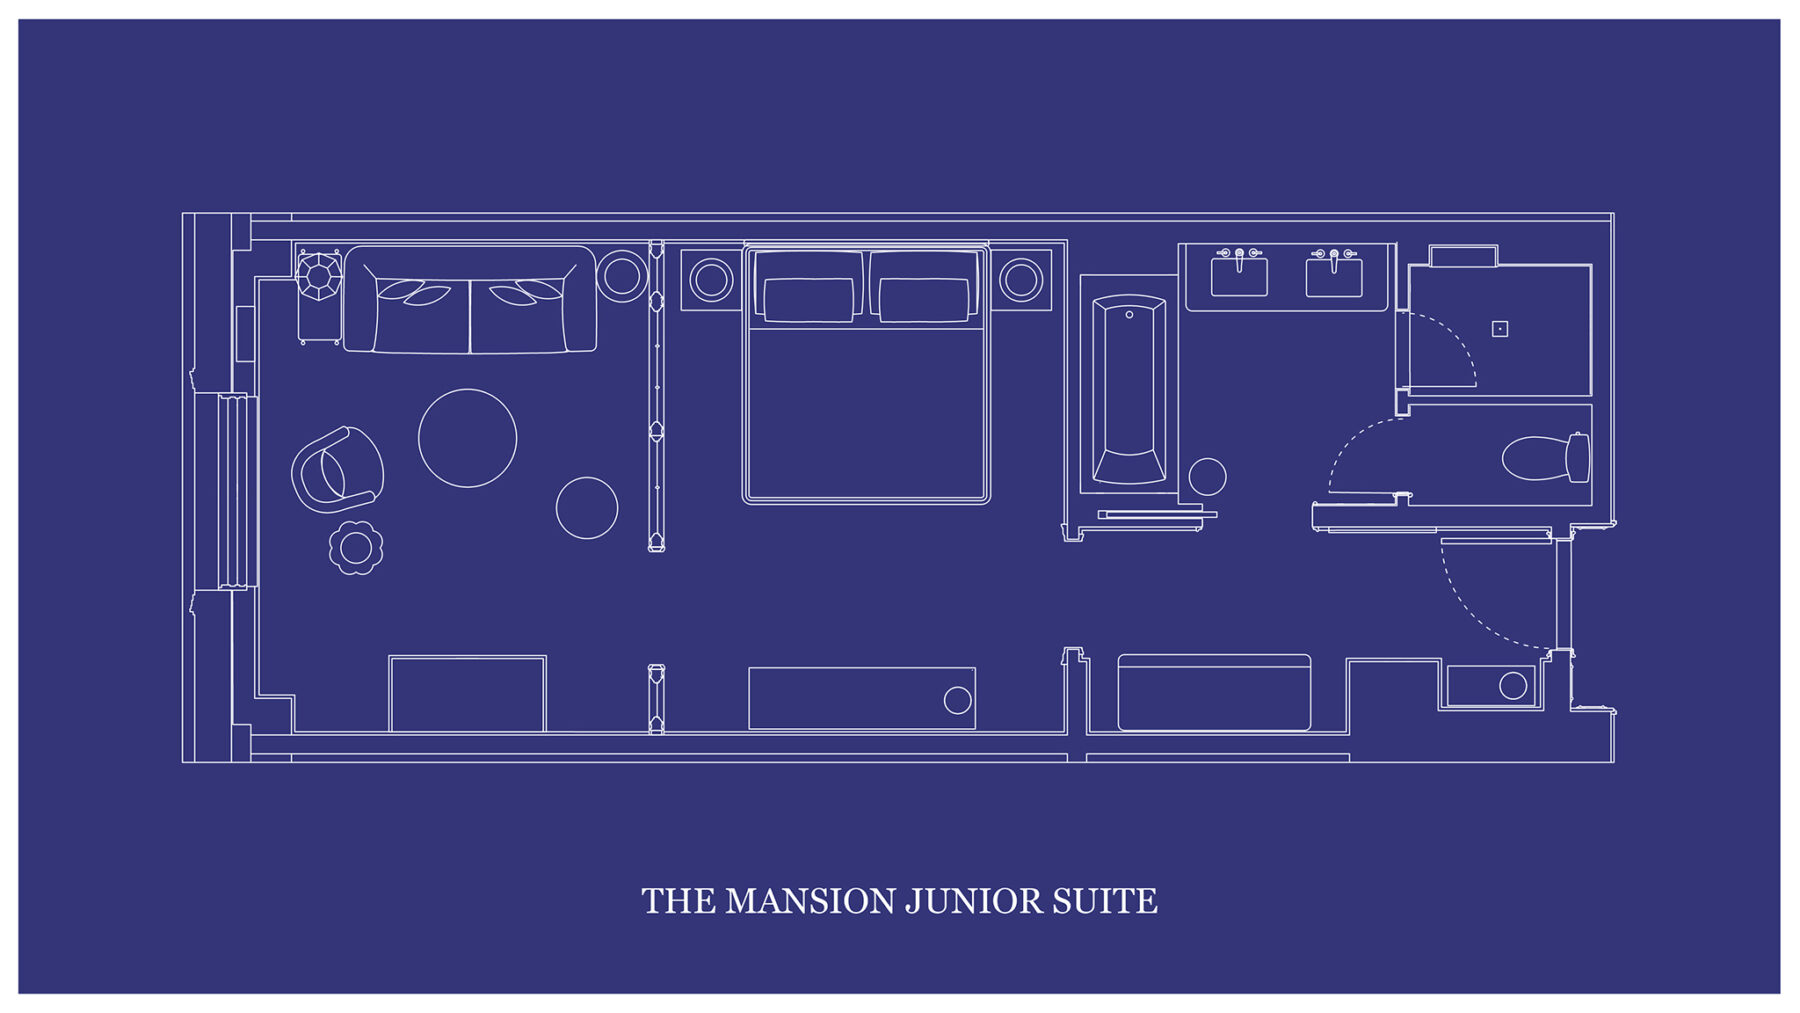 The architectural layout of "THE MANSION JUNIOR SUITE" is depicted on a blueprint map.